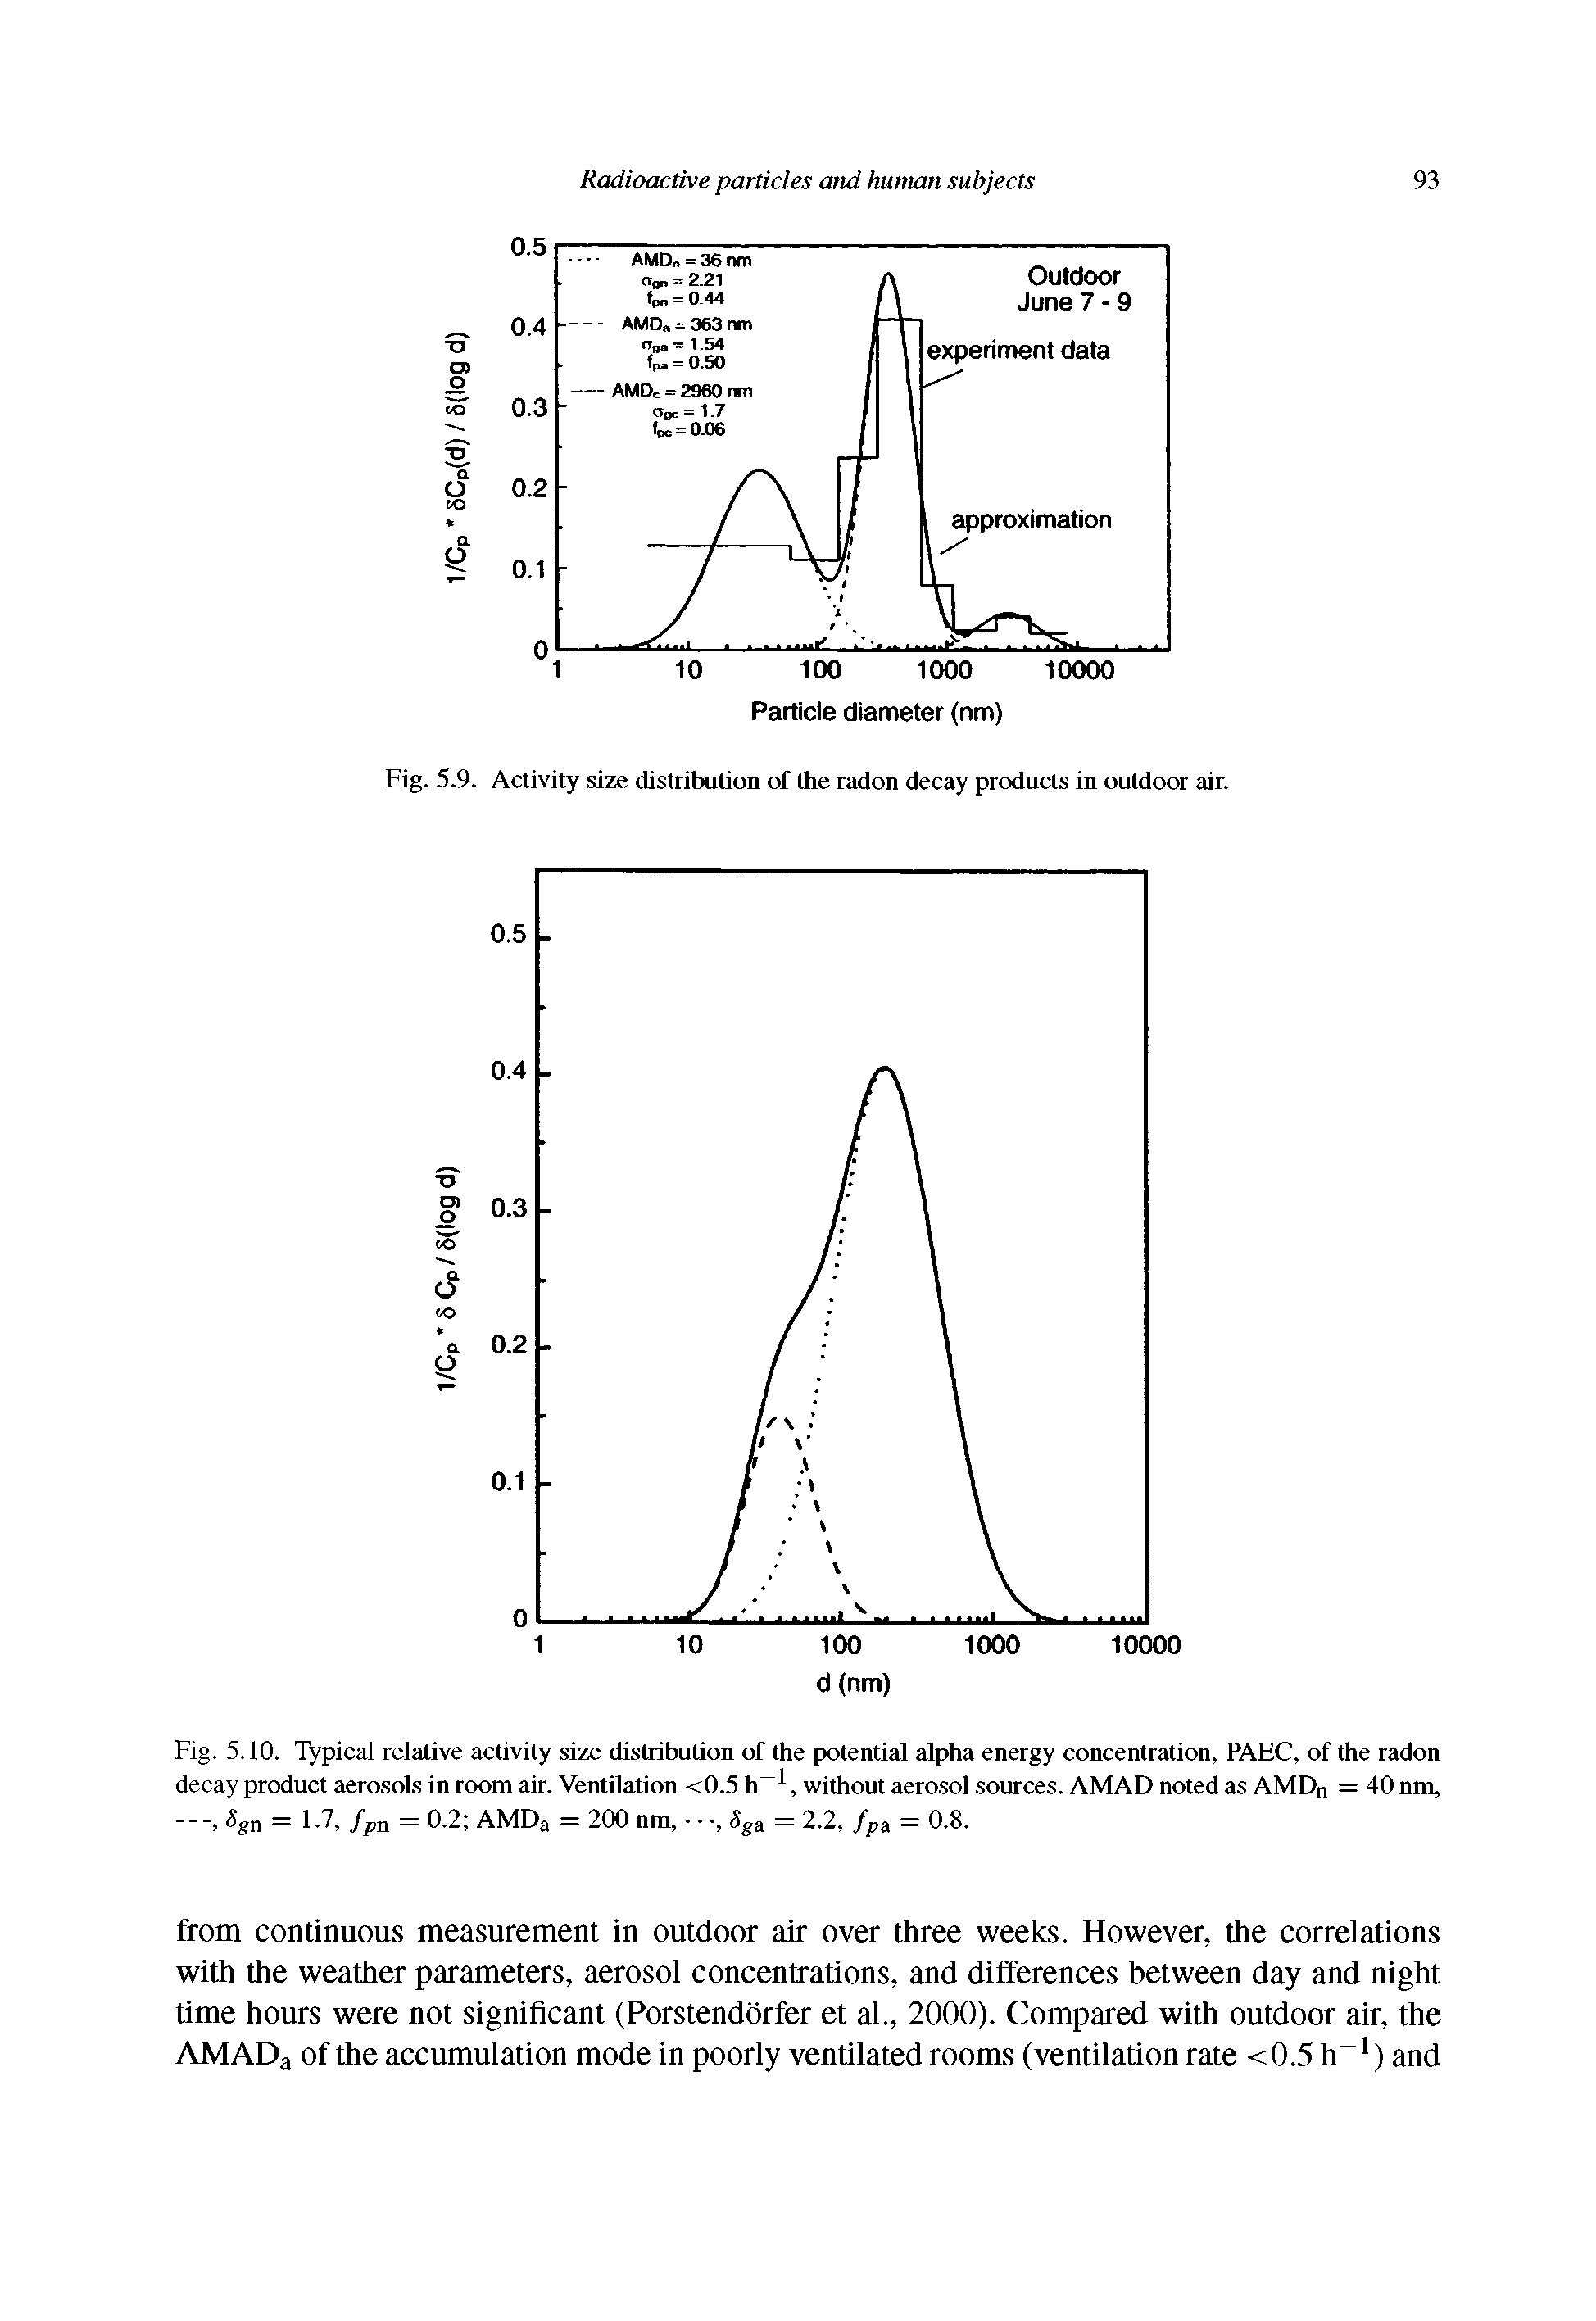 Fig. 5.10. Typical relative activity size distribution of the potential alpha energy concentration, PAEC, of the radon decay product aerosols in room air. Ventilation <0.5 h , without aerosol sources. AMAD noted as AMDn = 40 nm, Sg = 1.7, fpn = 0.2 AMDa = 200 nm, , Sga = 2.2, /pa = 0.8.